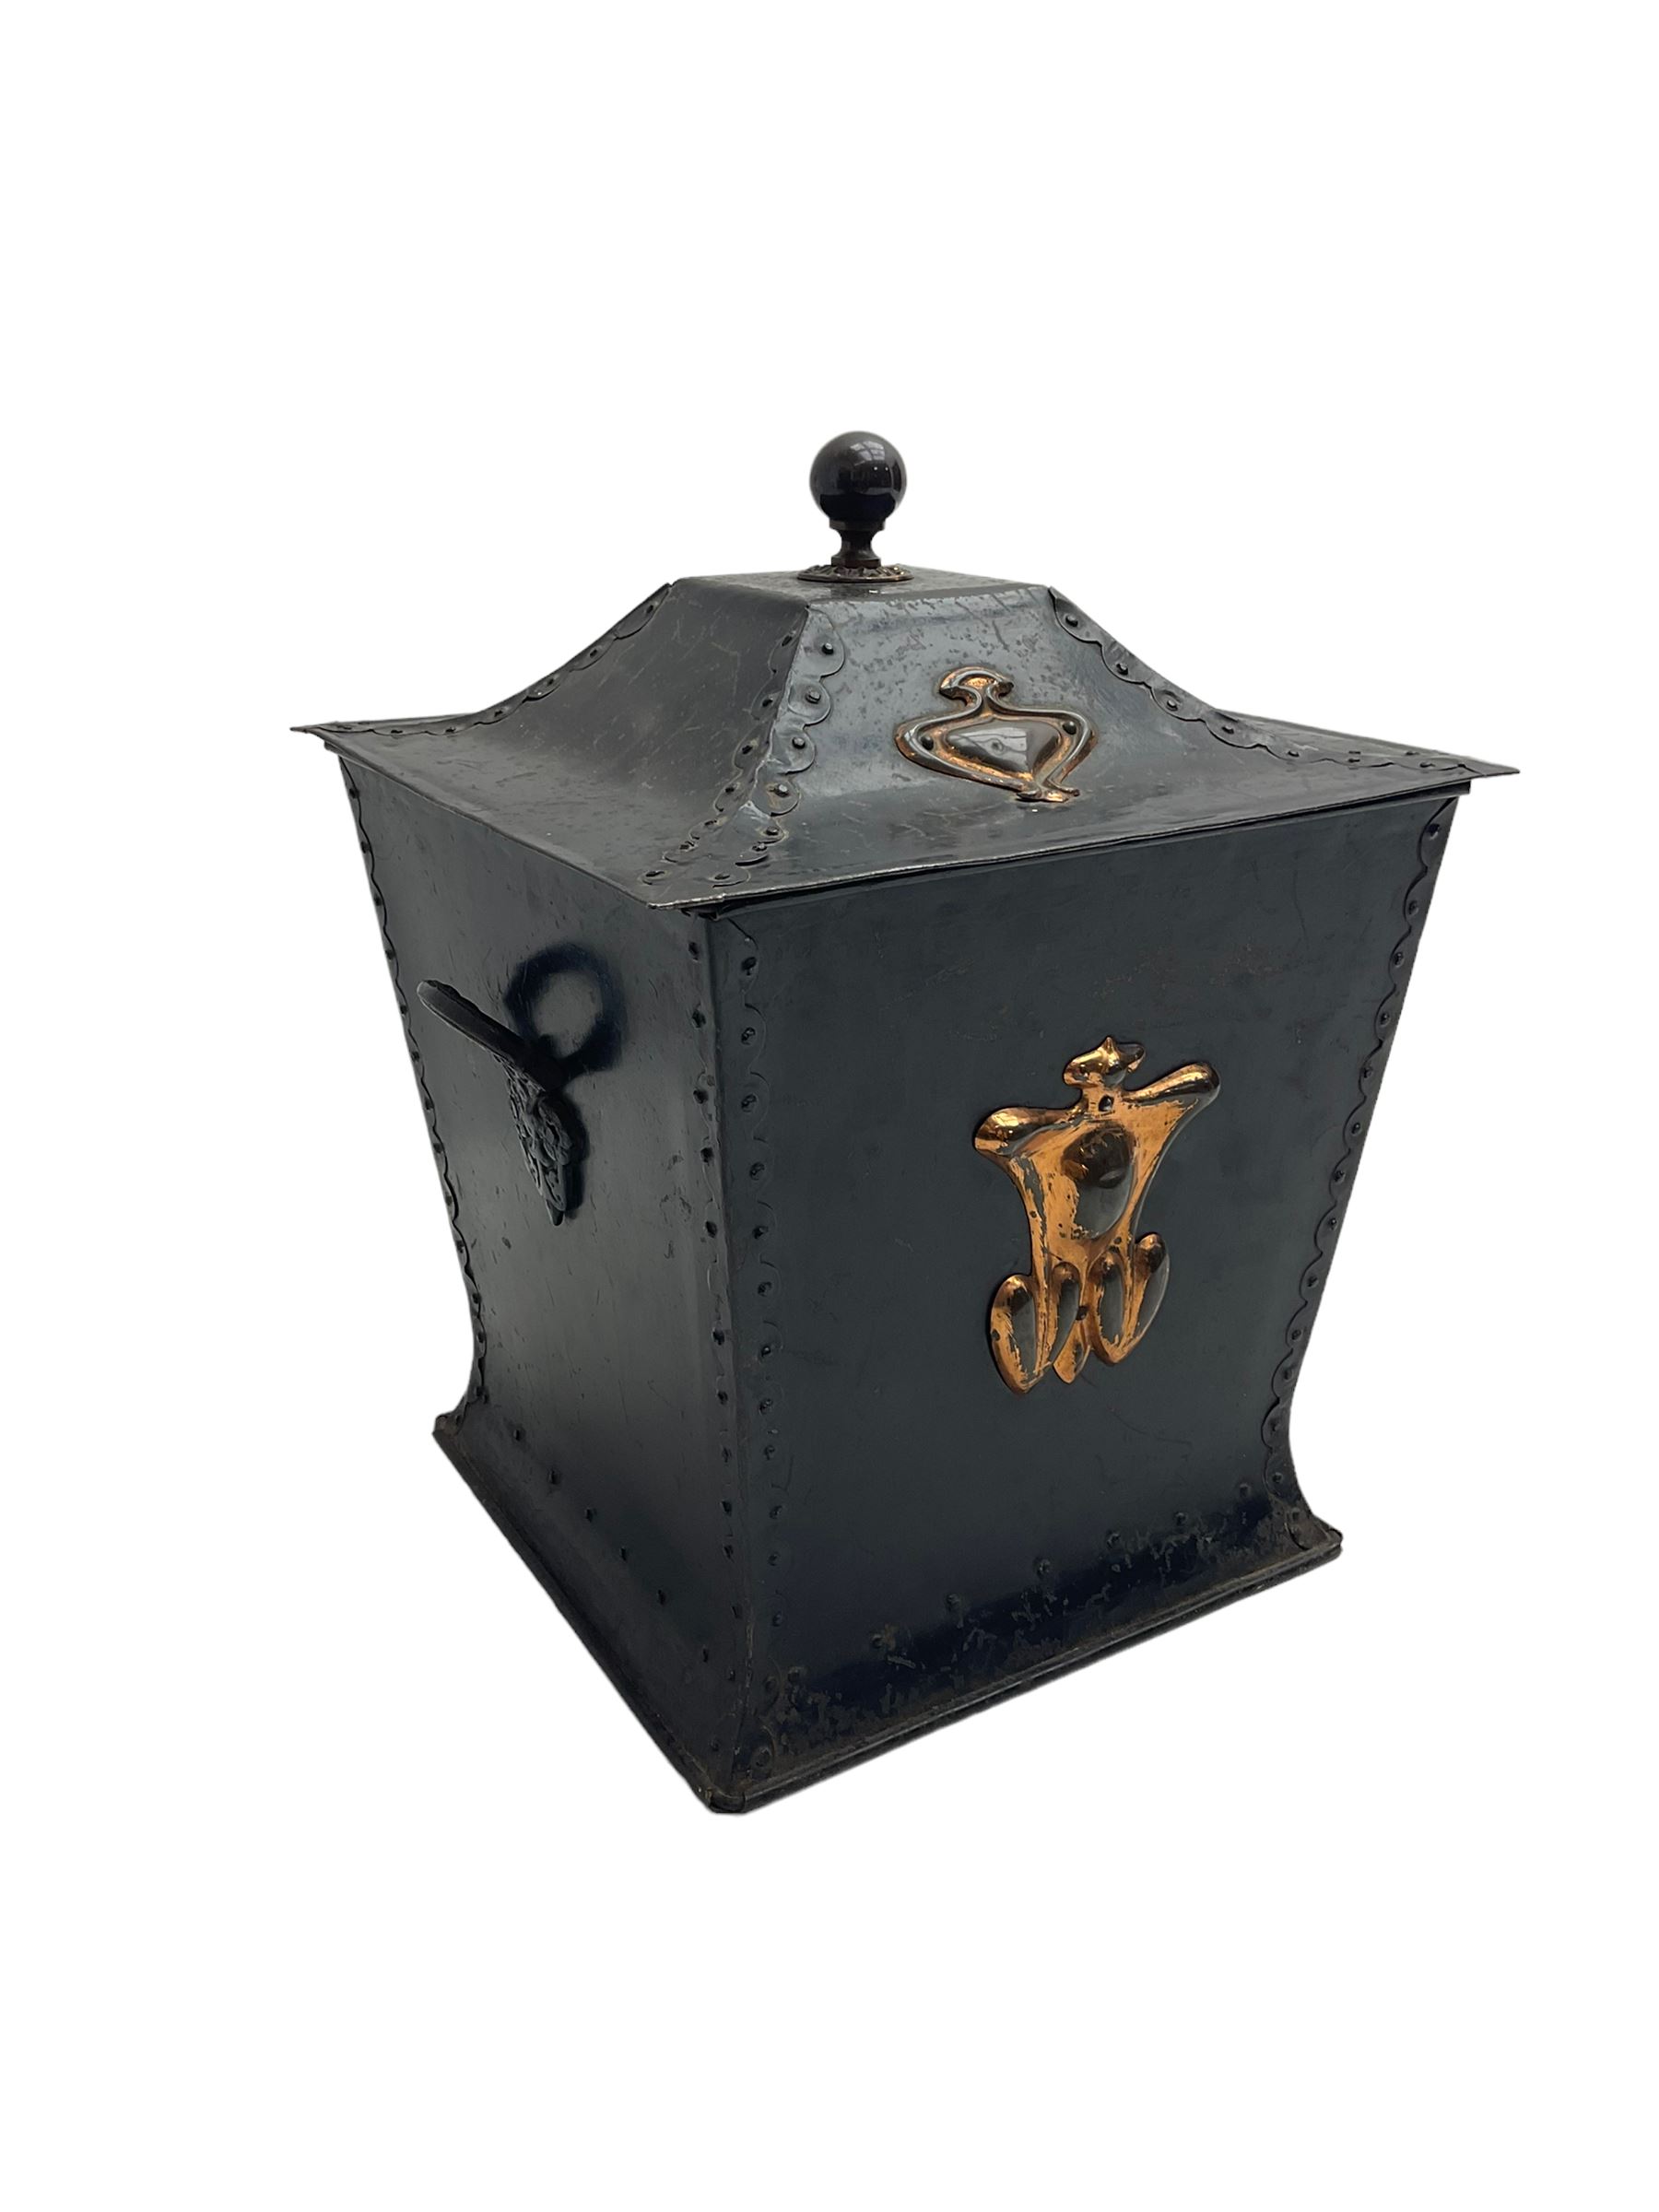 Art Nouveau period metal coal bucket with hinged lid - Image 6 of 9